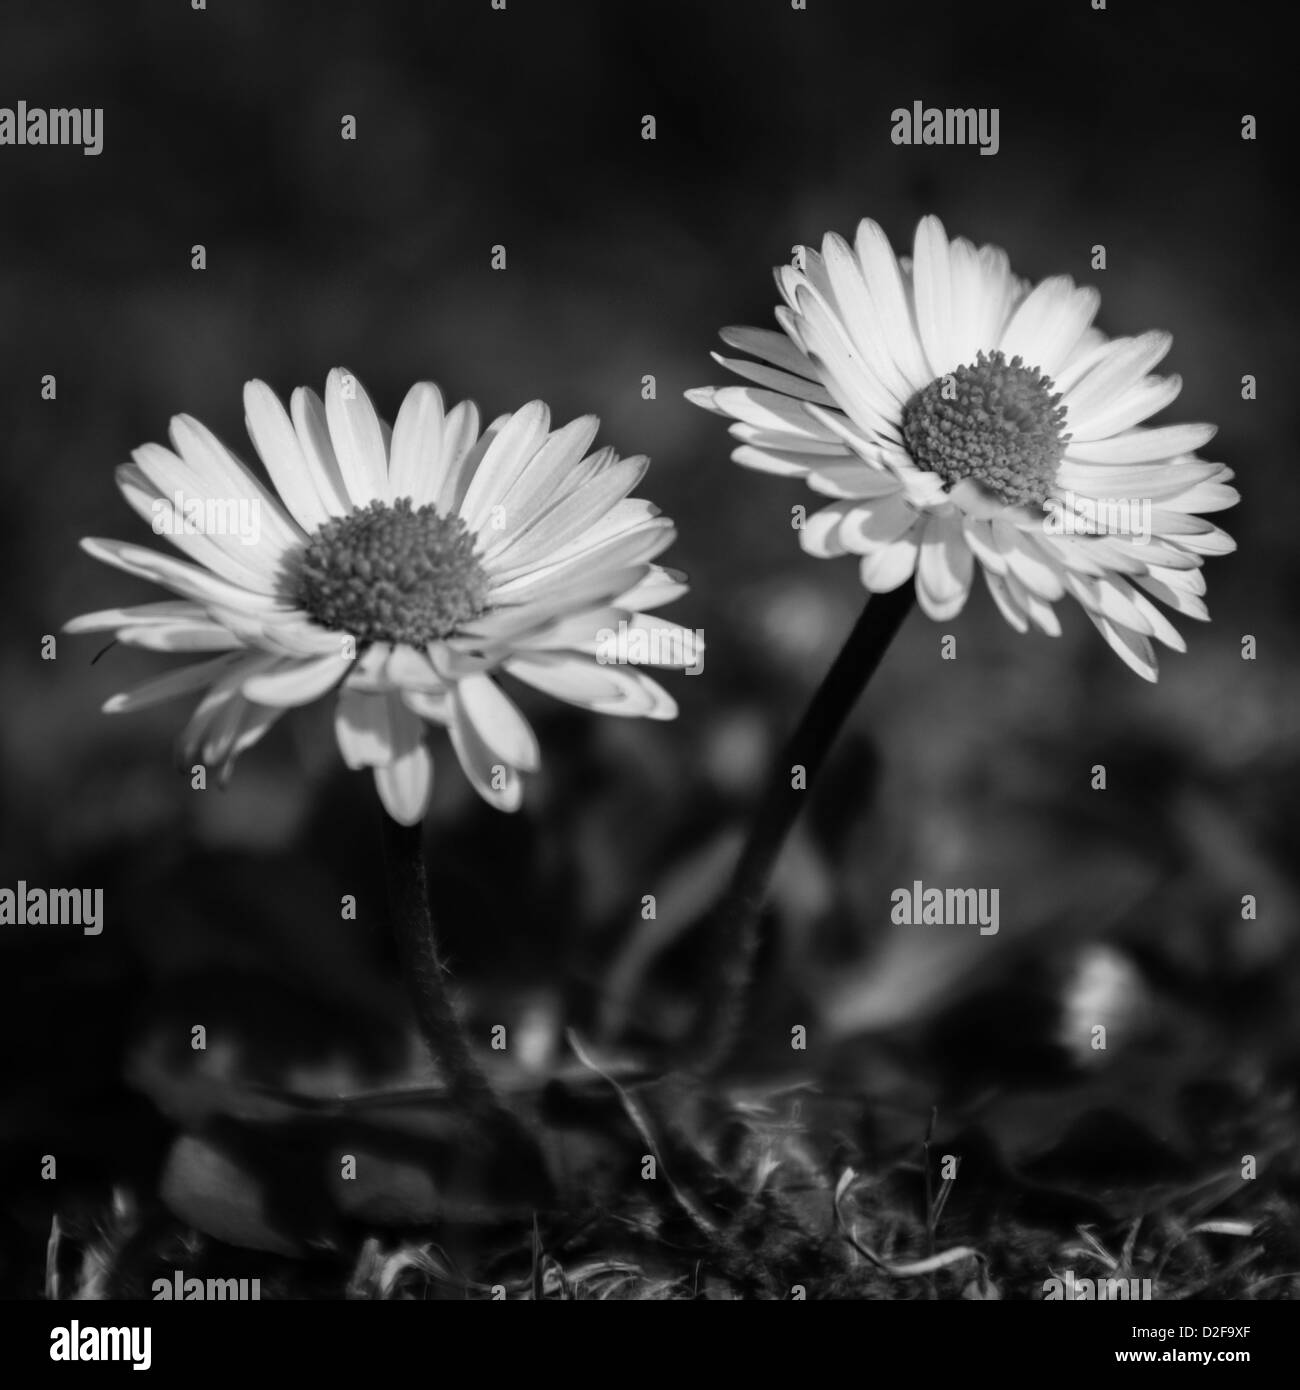 Daisy Flower - A pair of flowering common daisy (bellis perennis) in black and white Stock Photo